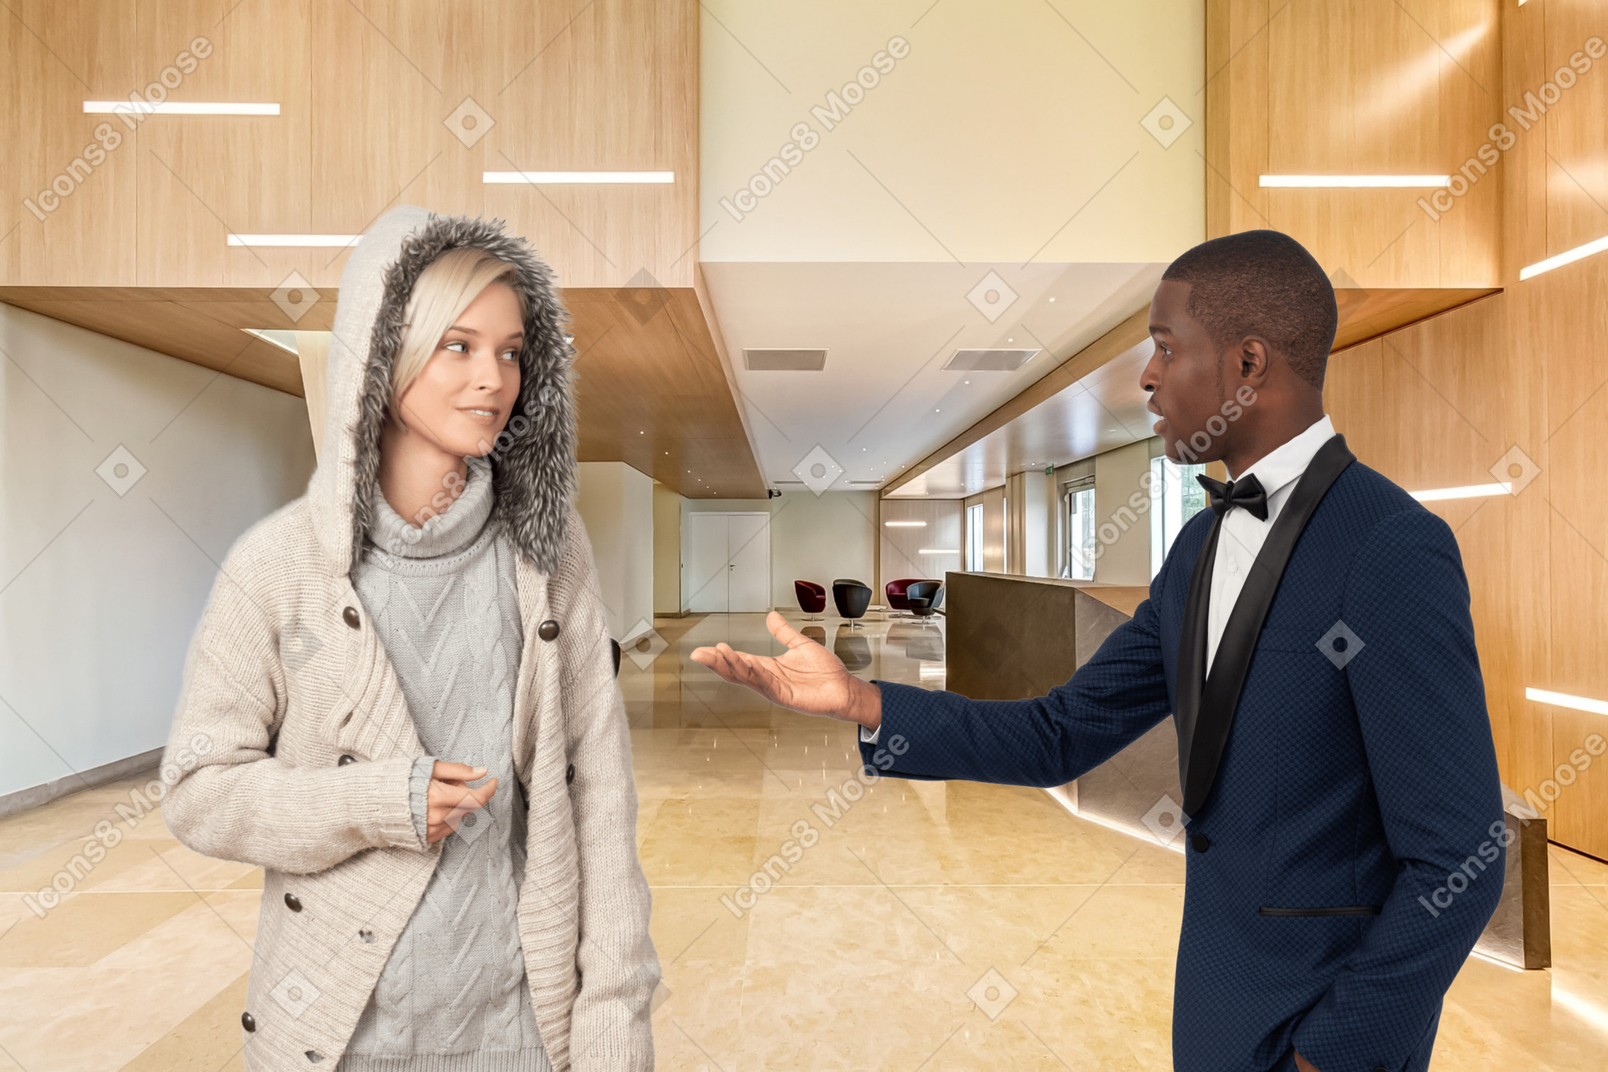 Doorman asking a lost woman where she's heading